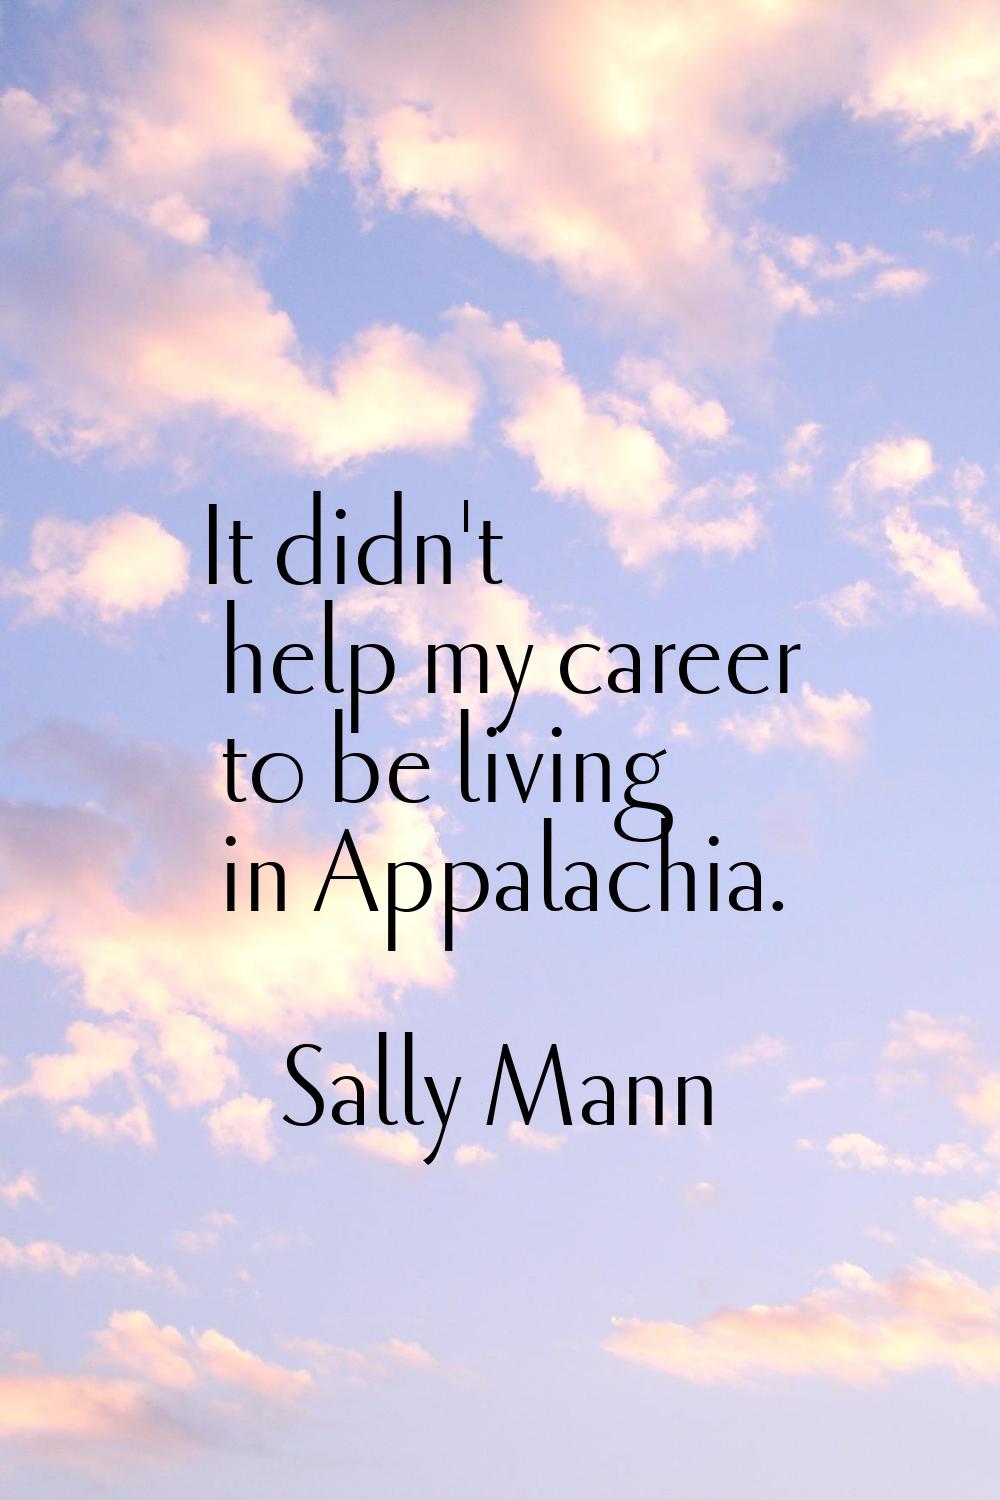 It didn't help my career to be living in Appalachia.